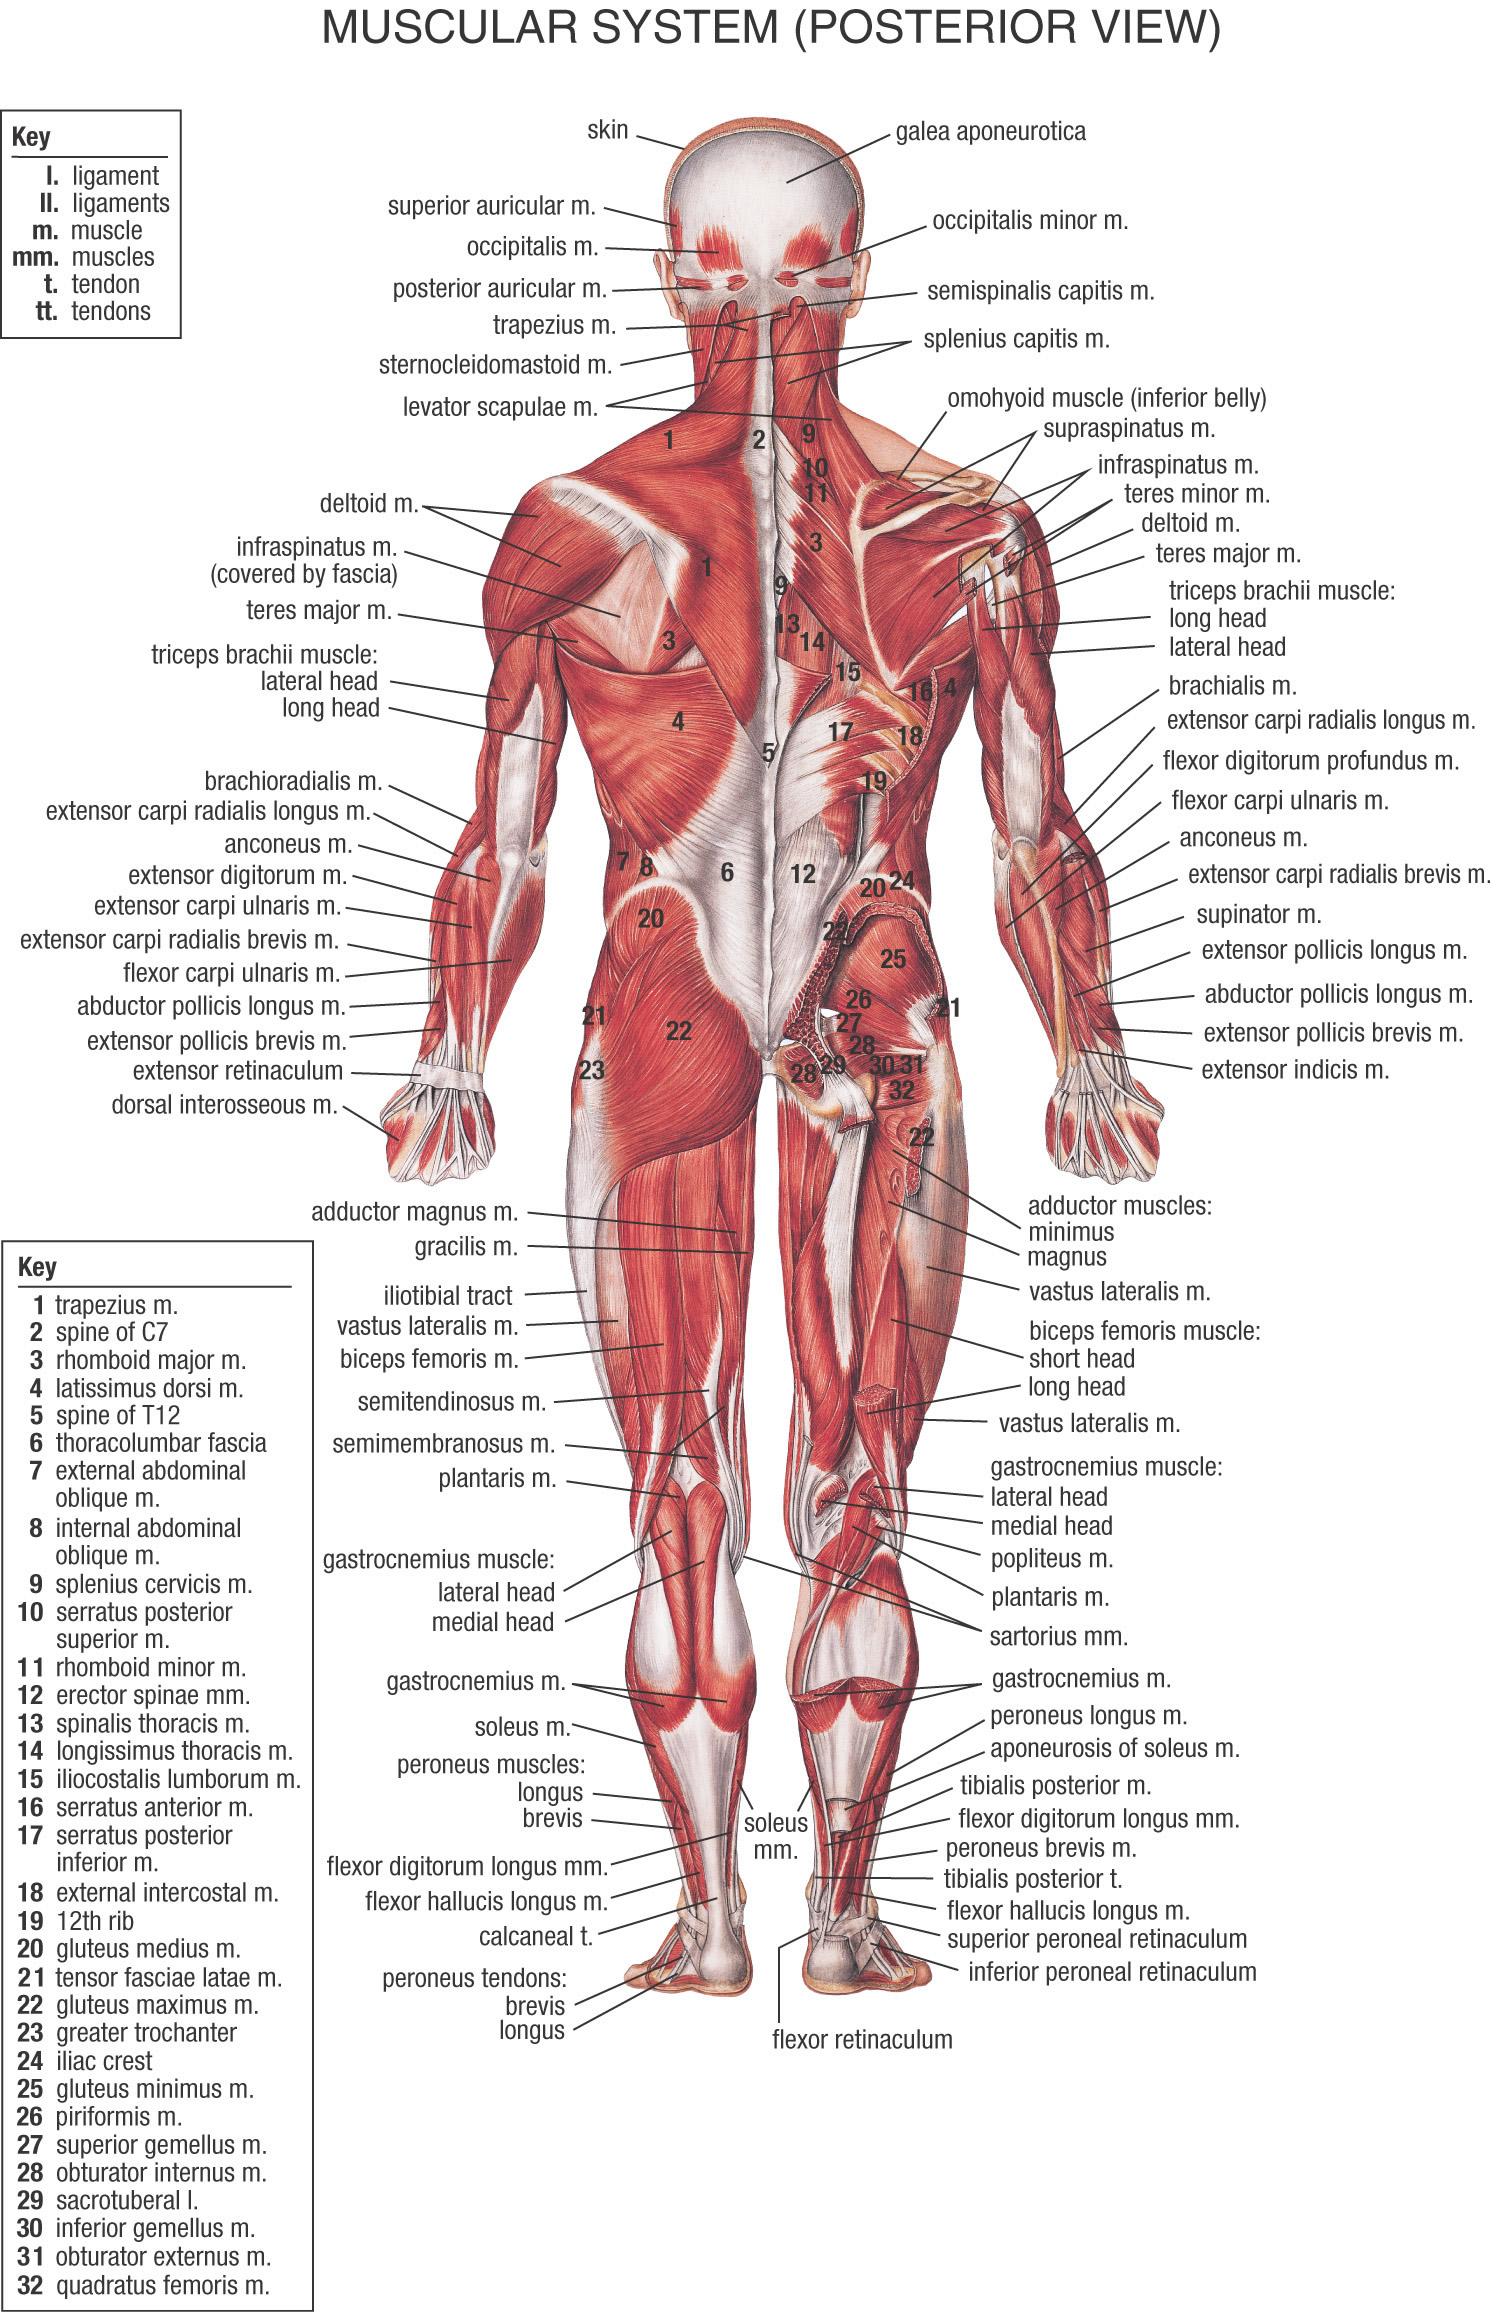 HB Muscular System Posterior